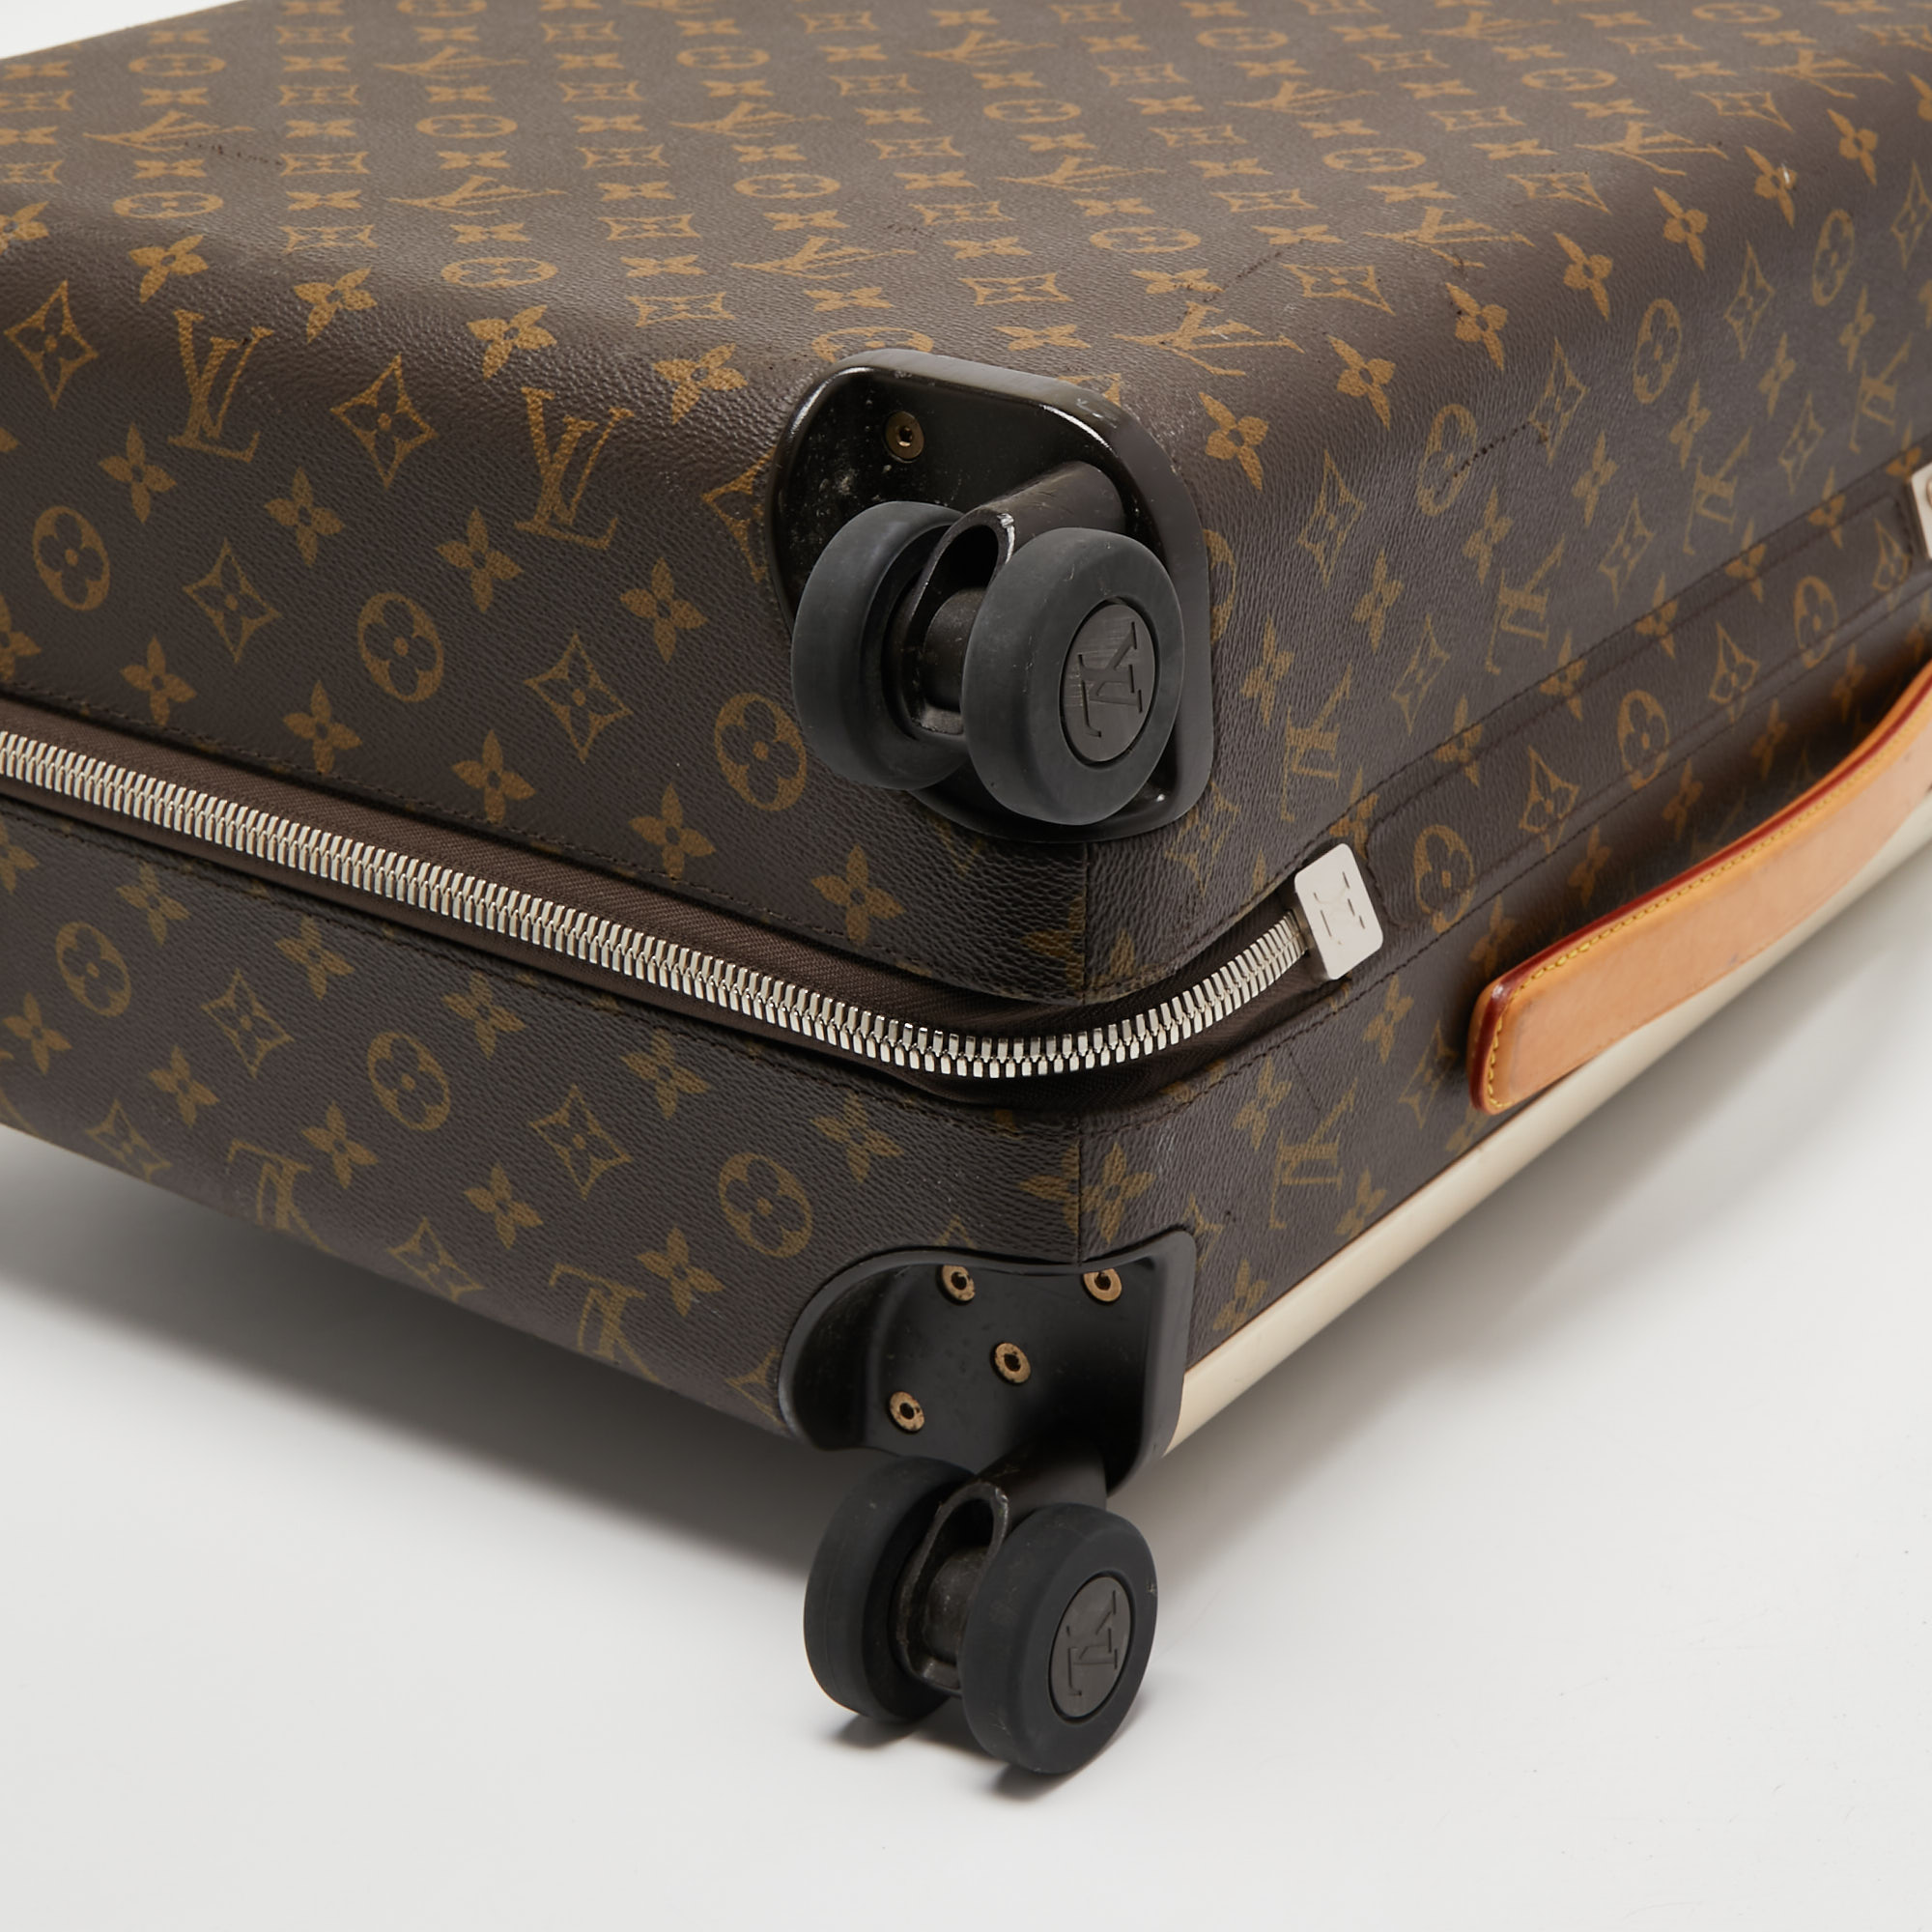 Louis Vuitton ಮೇಲೆ X: For the devoted travelers. The innovative Horizon  suitcase in Monogram from the latest Spirit of Travel Campaign. See  #LouisVuitton's wide range of travel bags at    /